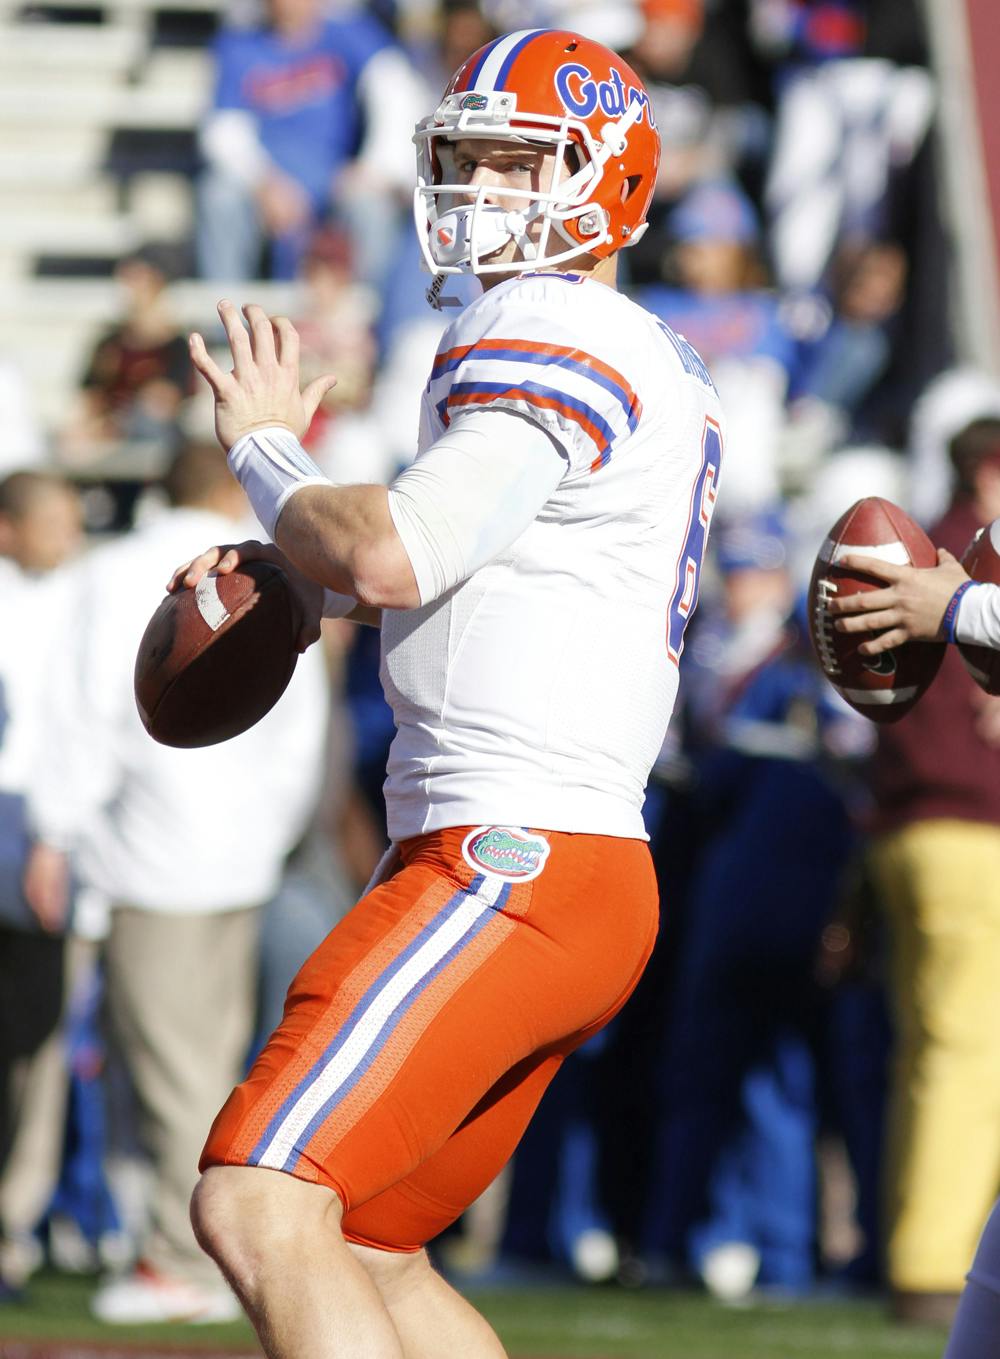 <p>Jeff Driskel tosses a football during warm-ups prior to Florida’s 37-26 victory against Florida State on Nov. 24 in Doak Campbell Stadium. Florida is ranked No. 10 to start the season.</p>